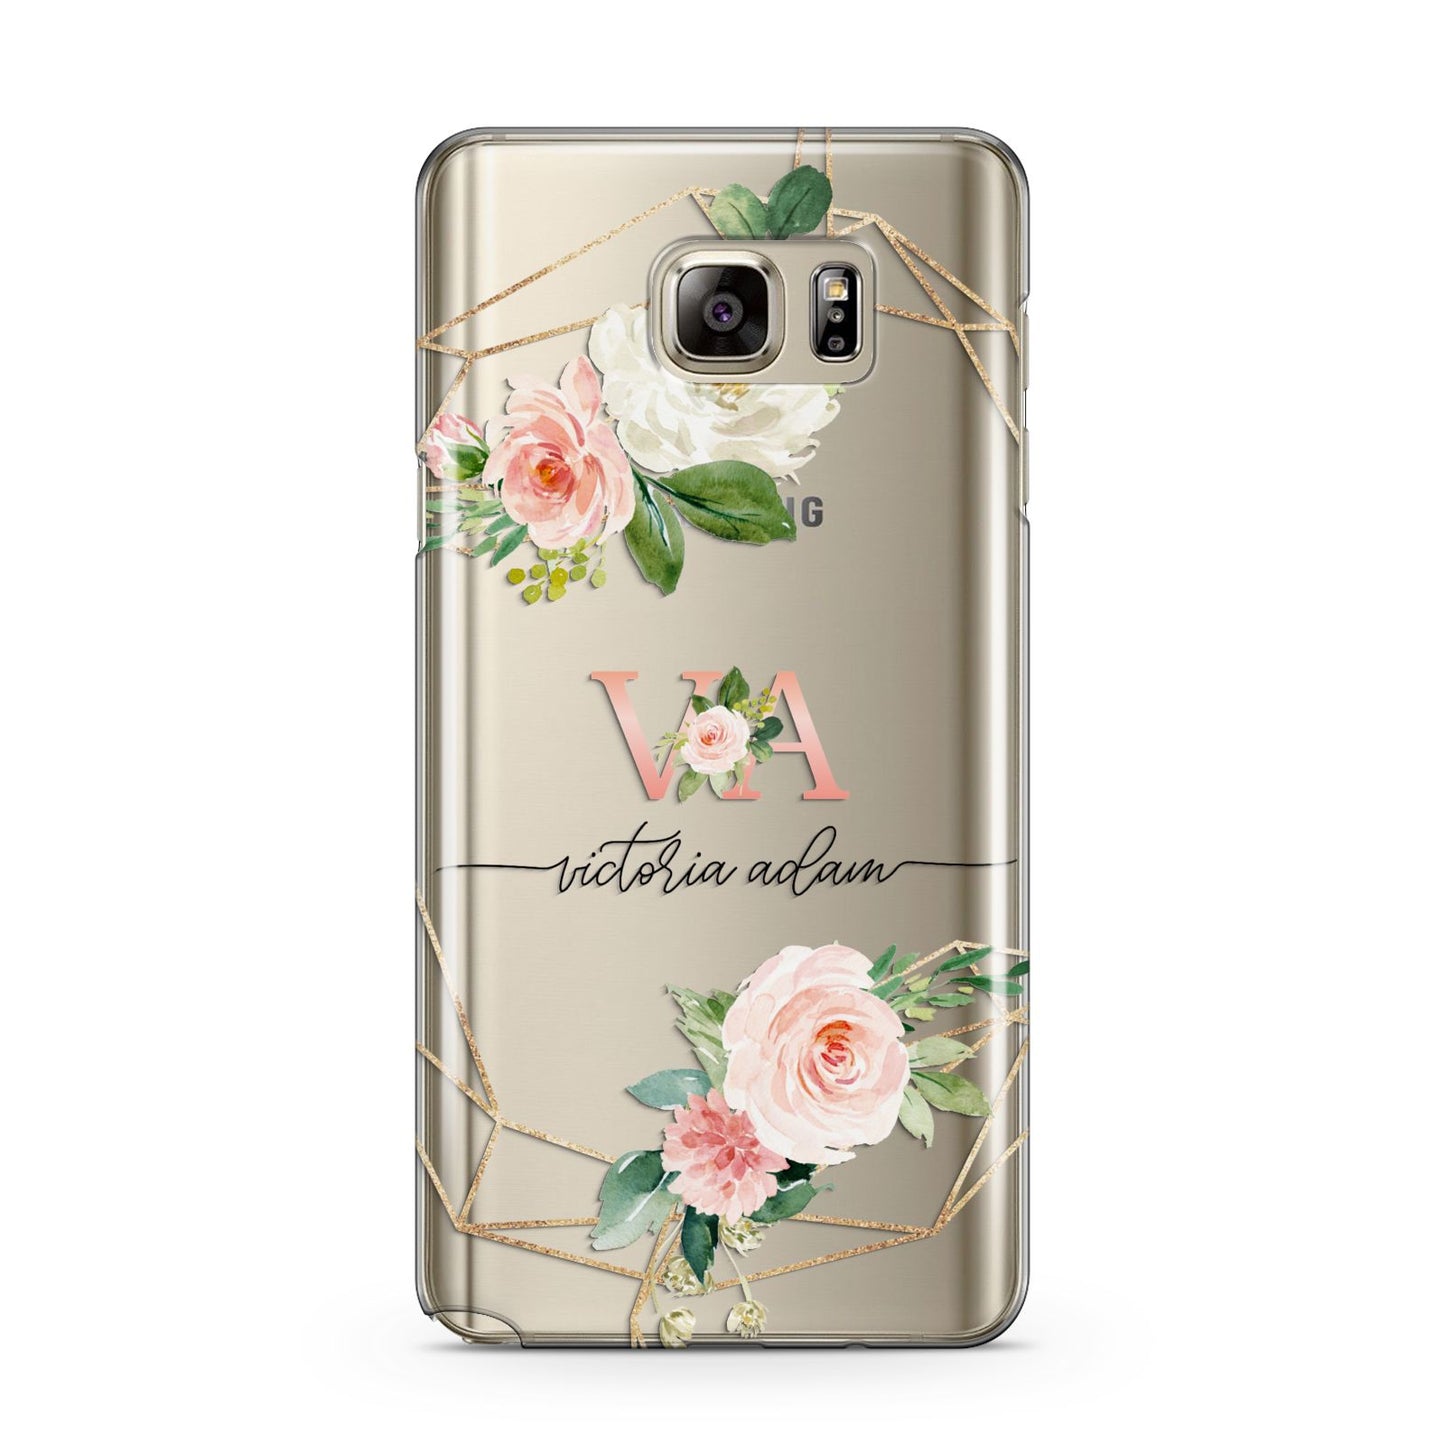 Blush Pink Rose Floral Personalised Samsung Galaxy Note 5 Case